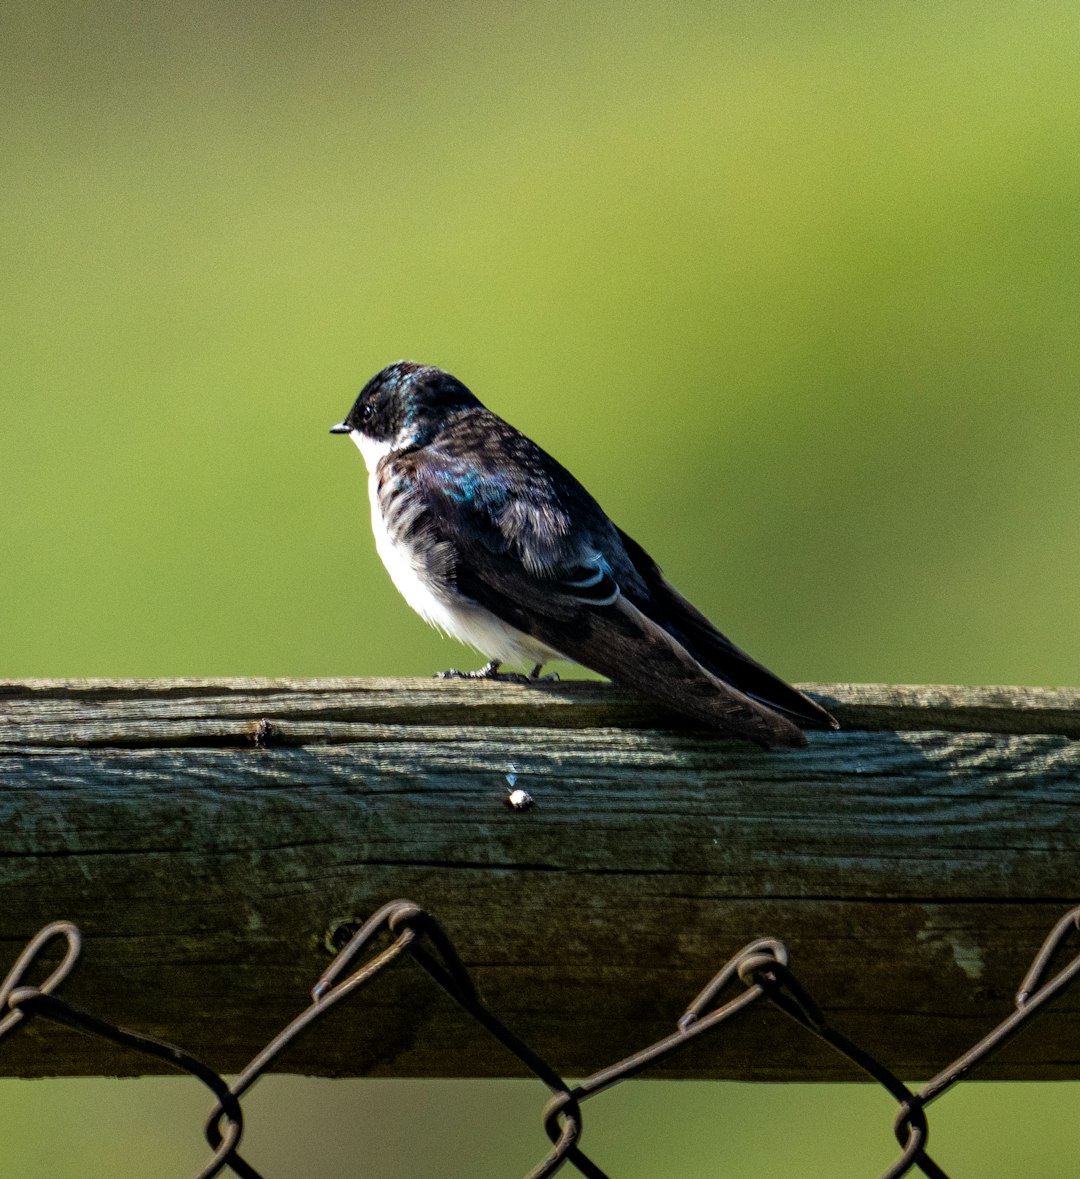 blue and white bird on brown wooden fence